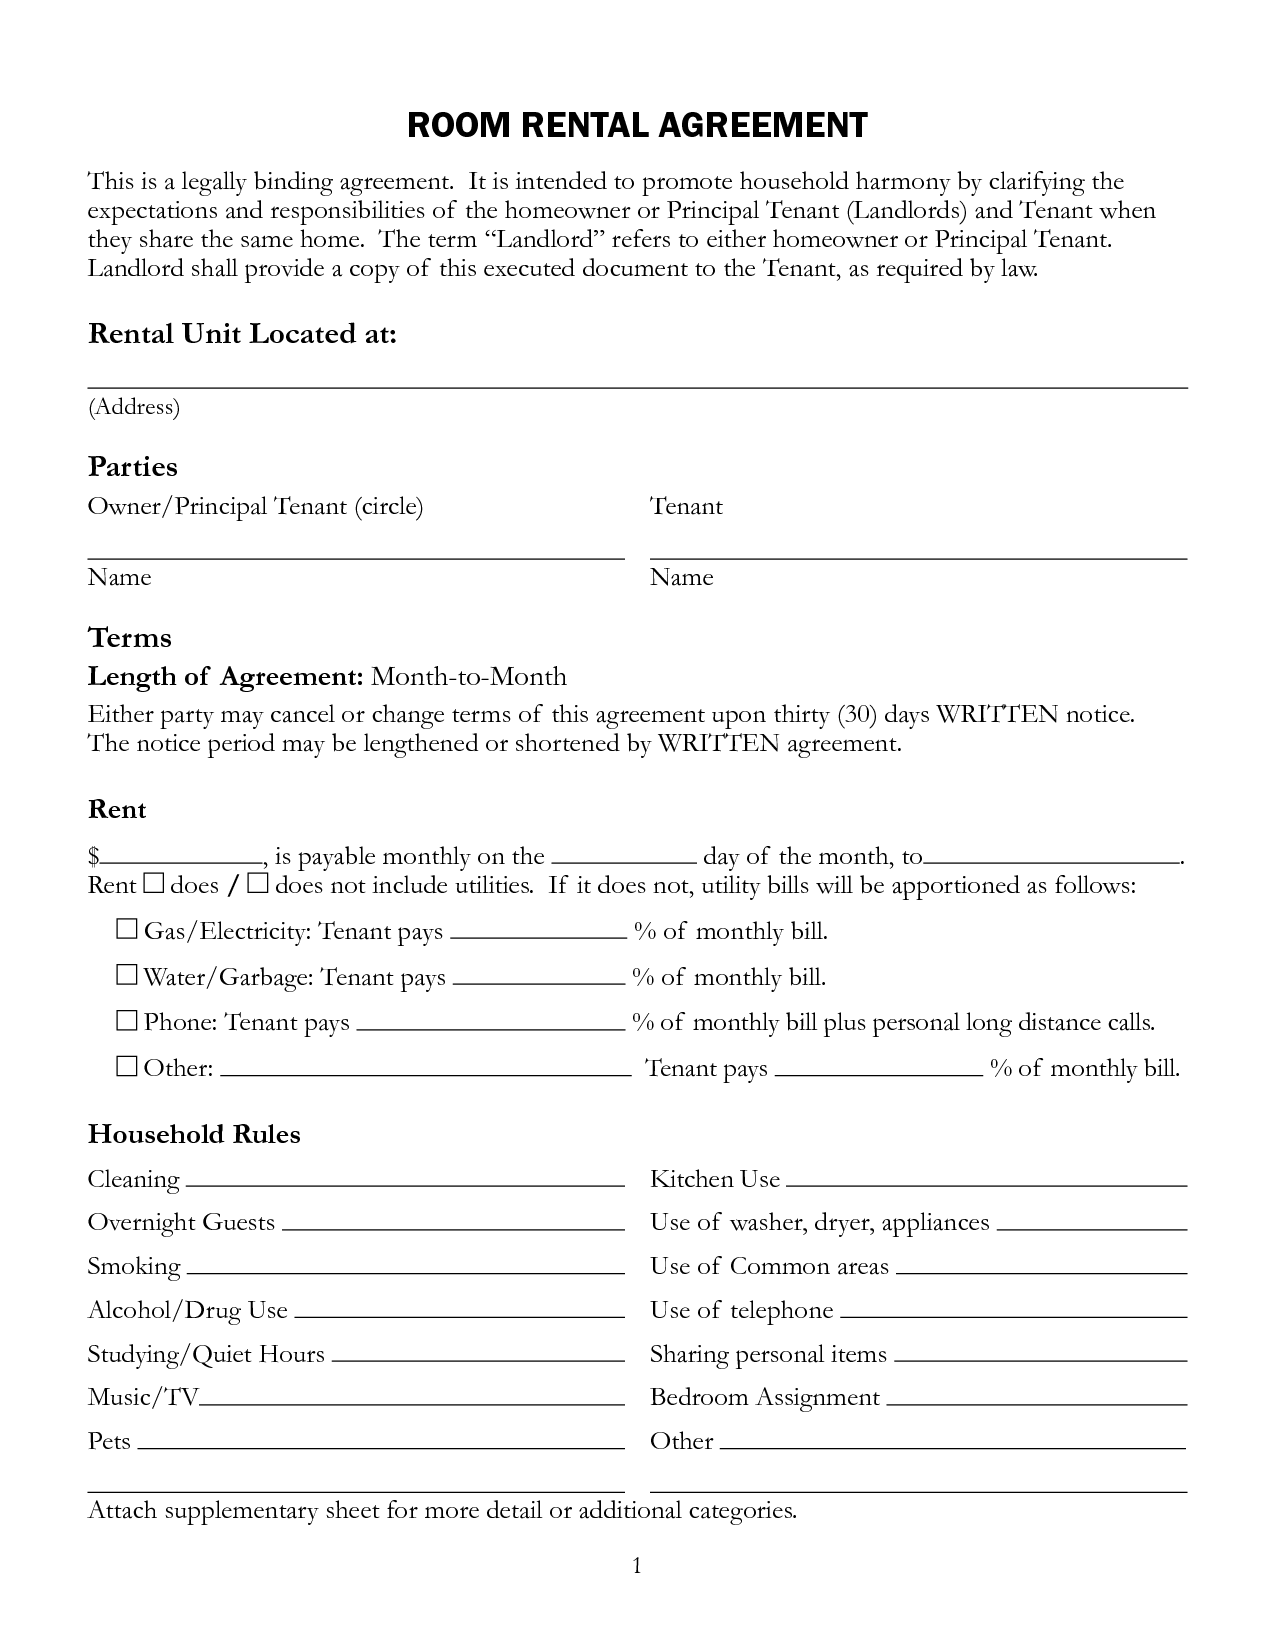 59 Printable Room Rental Agreement Forms and Templates   Fillable 